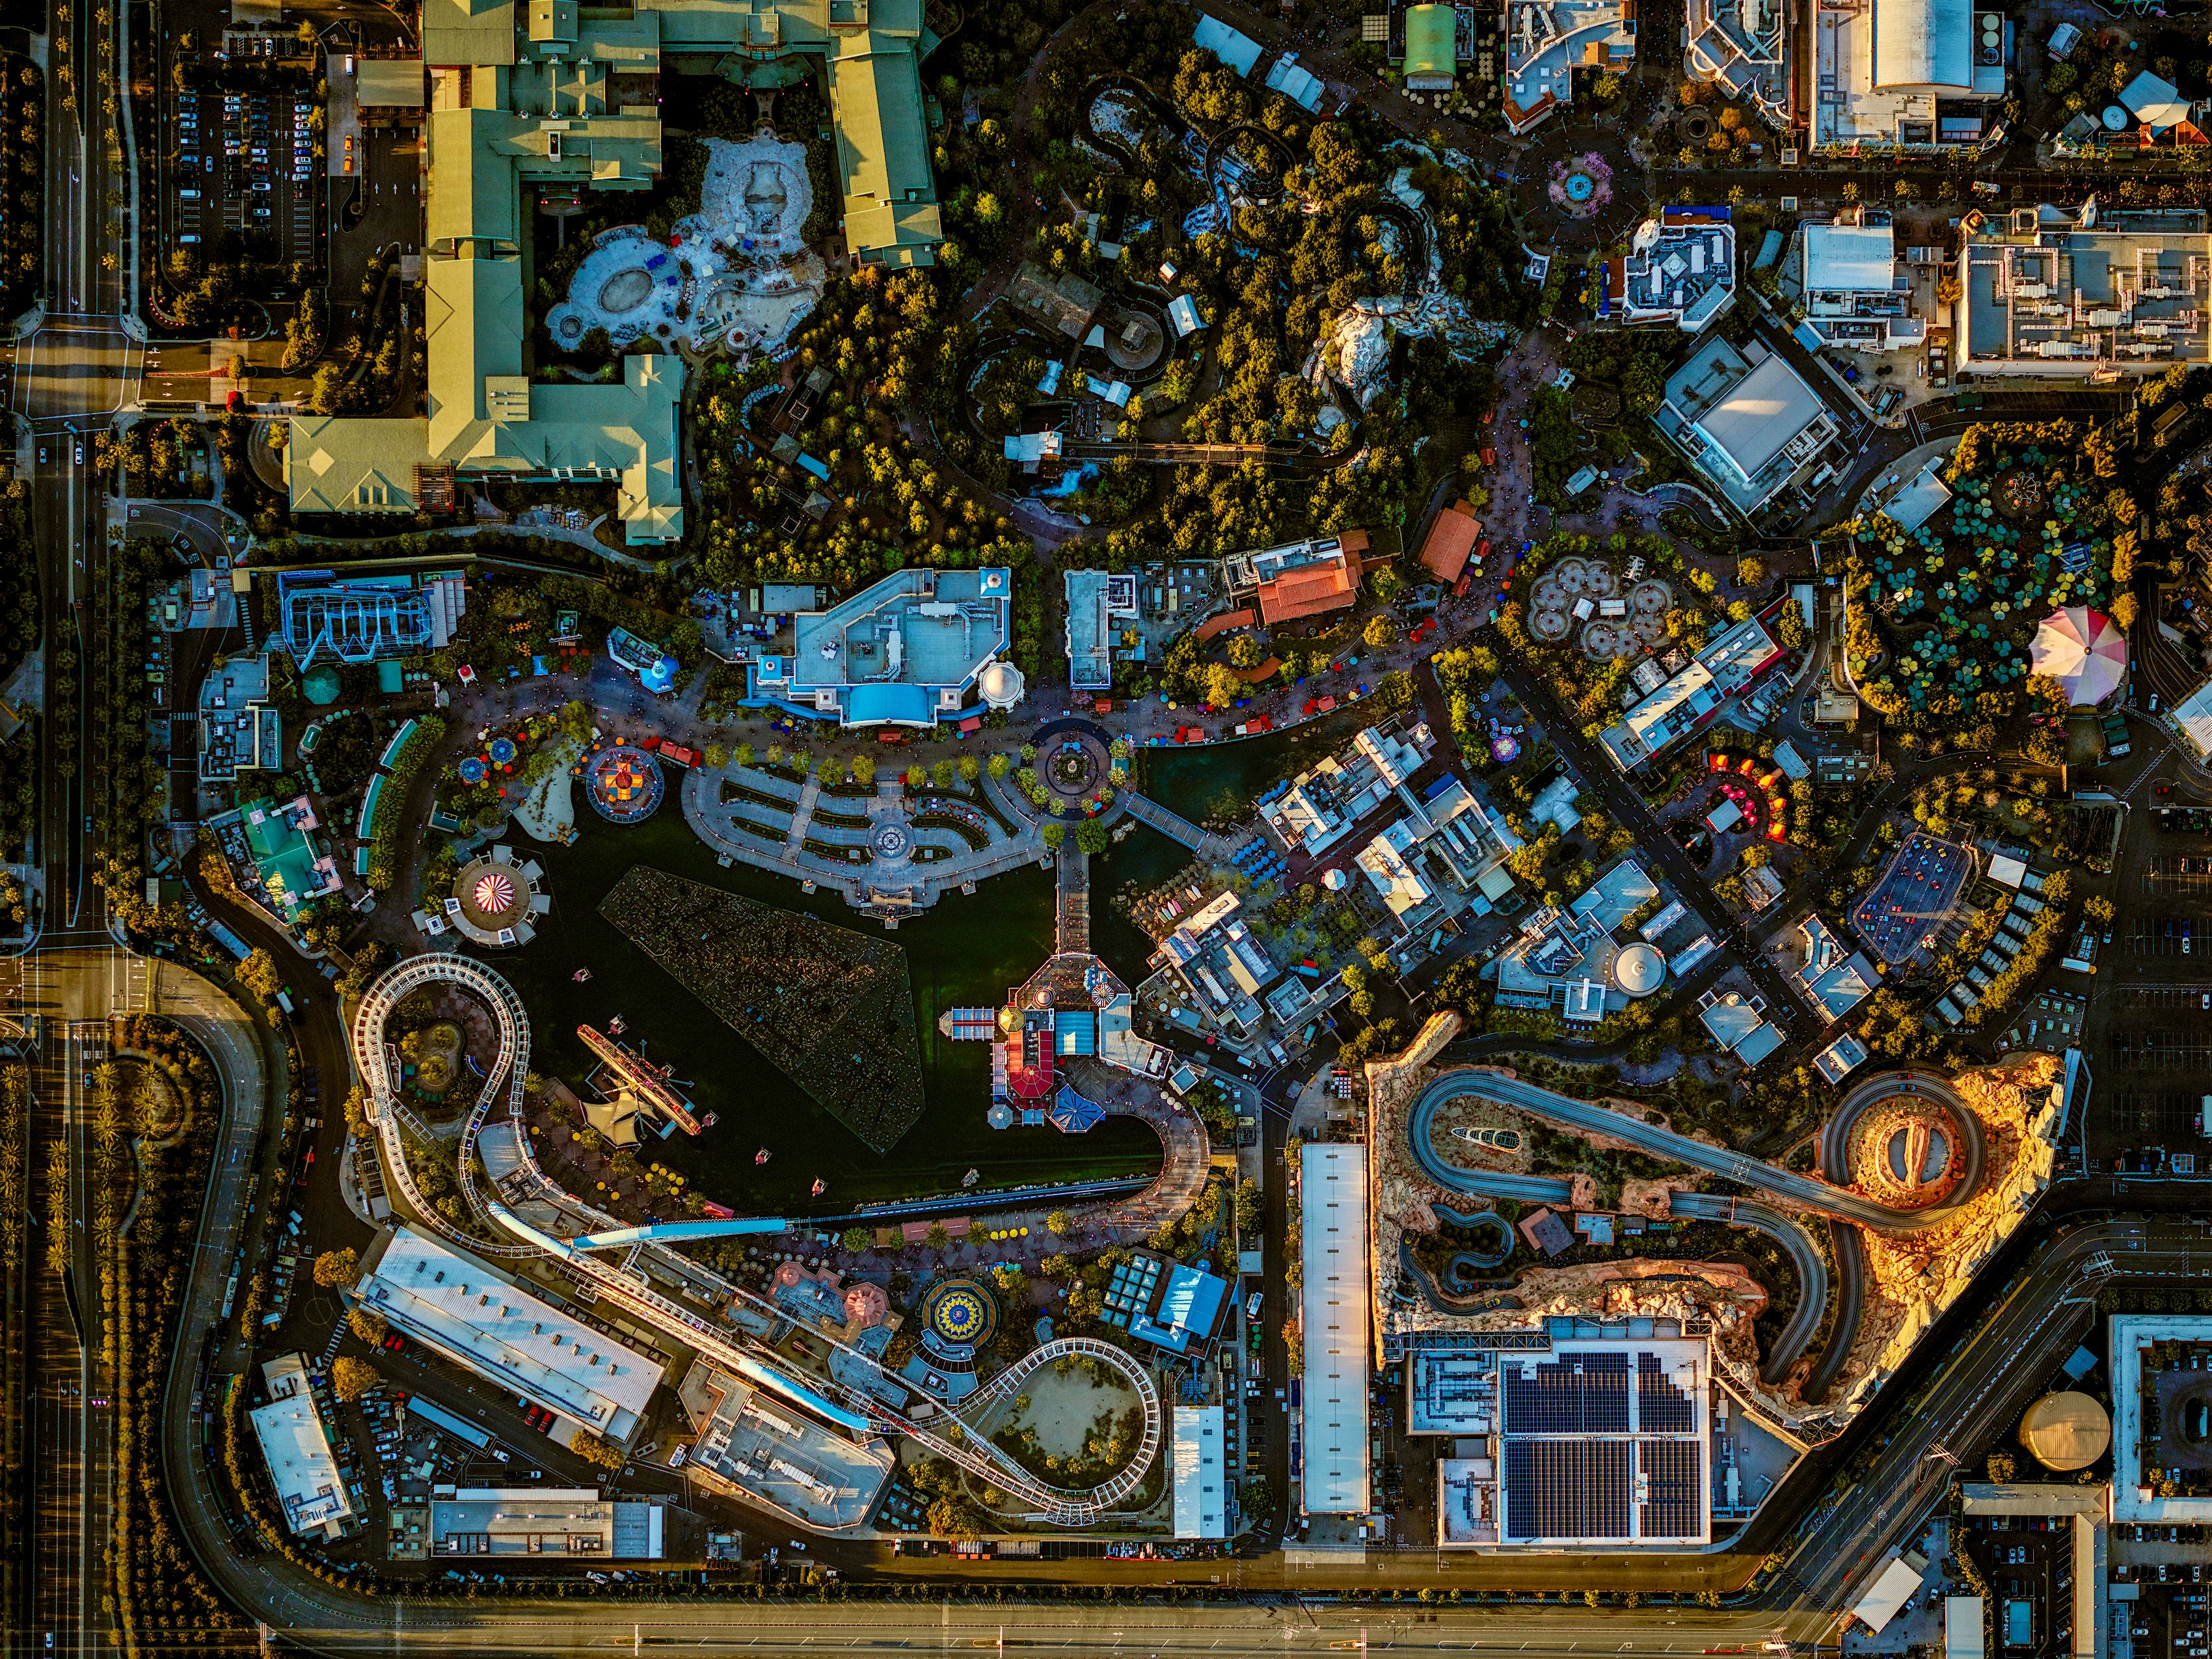 See these spectacular aerial images of Disneyland theme parks from